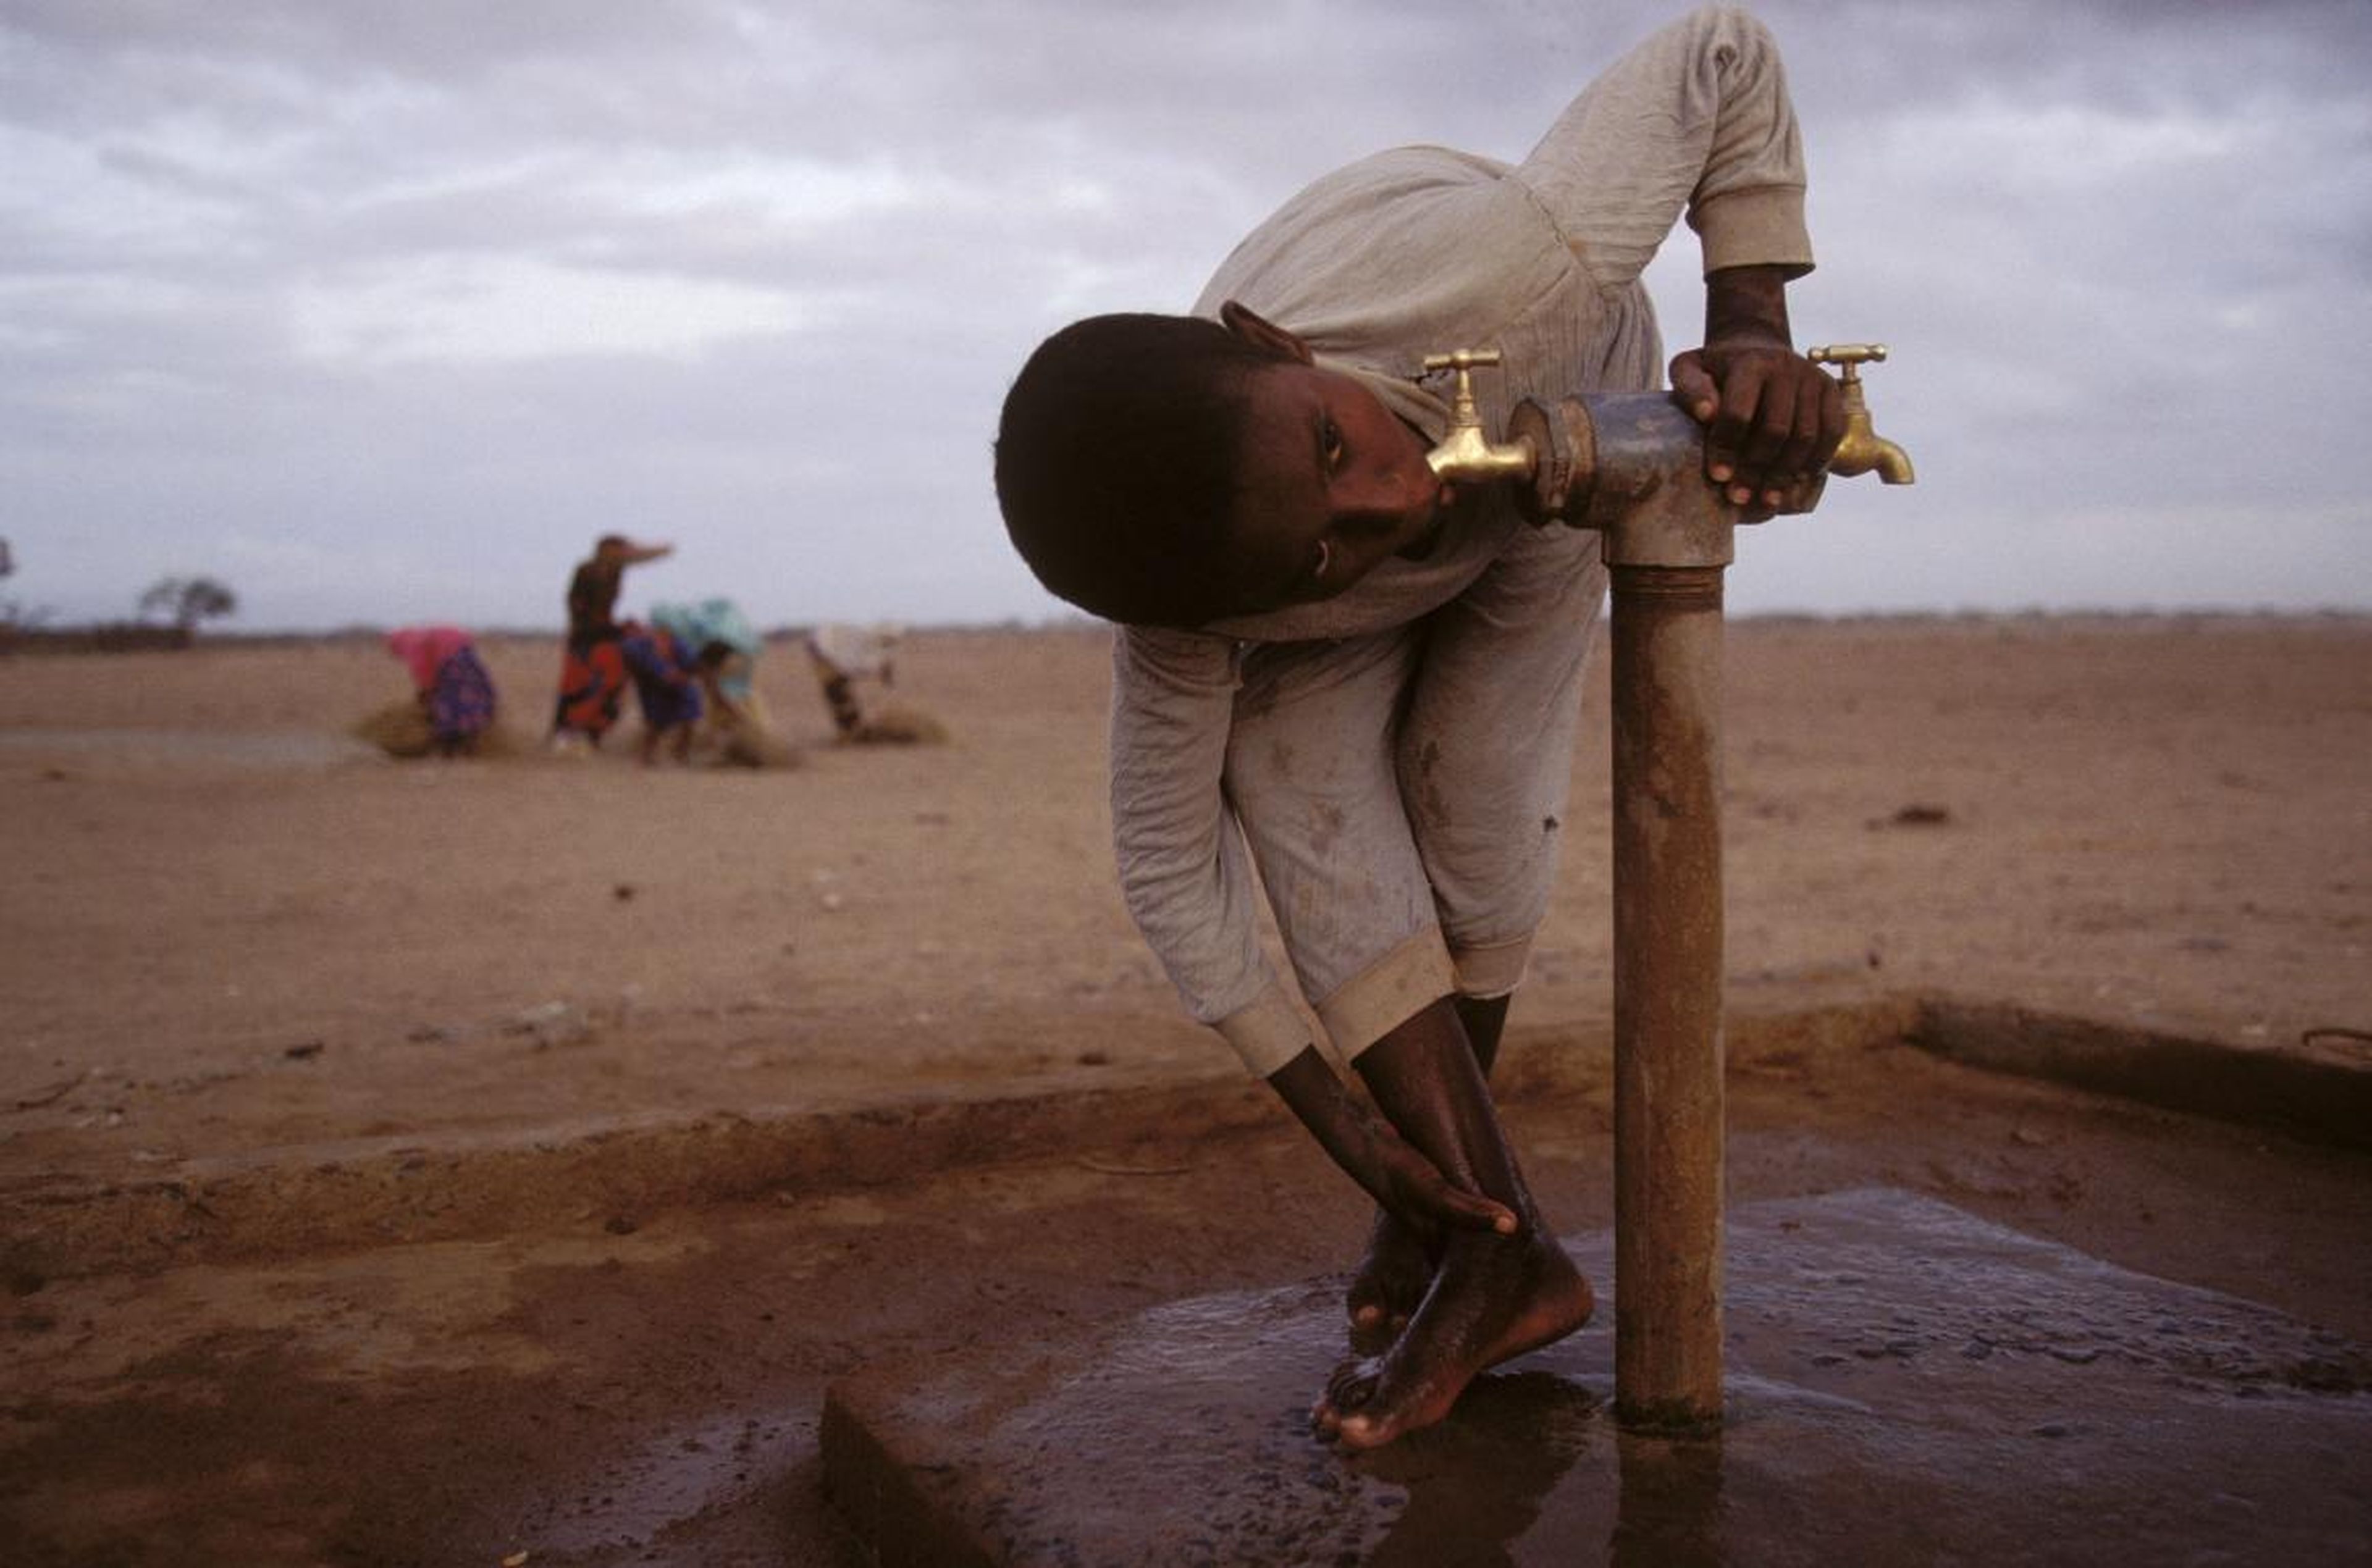 African cities are running out of water.